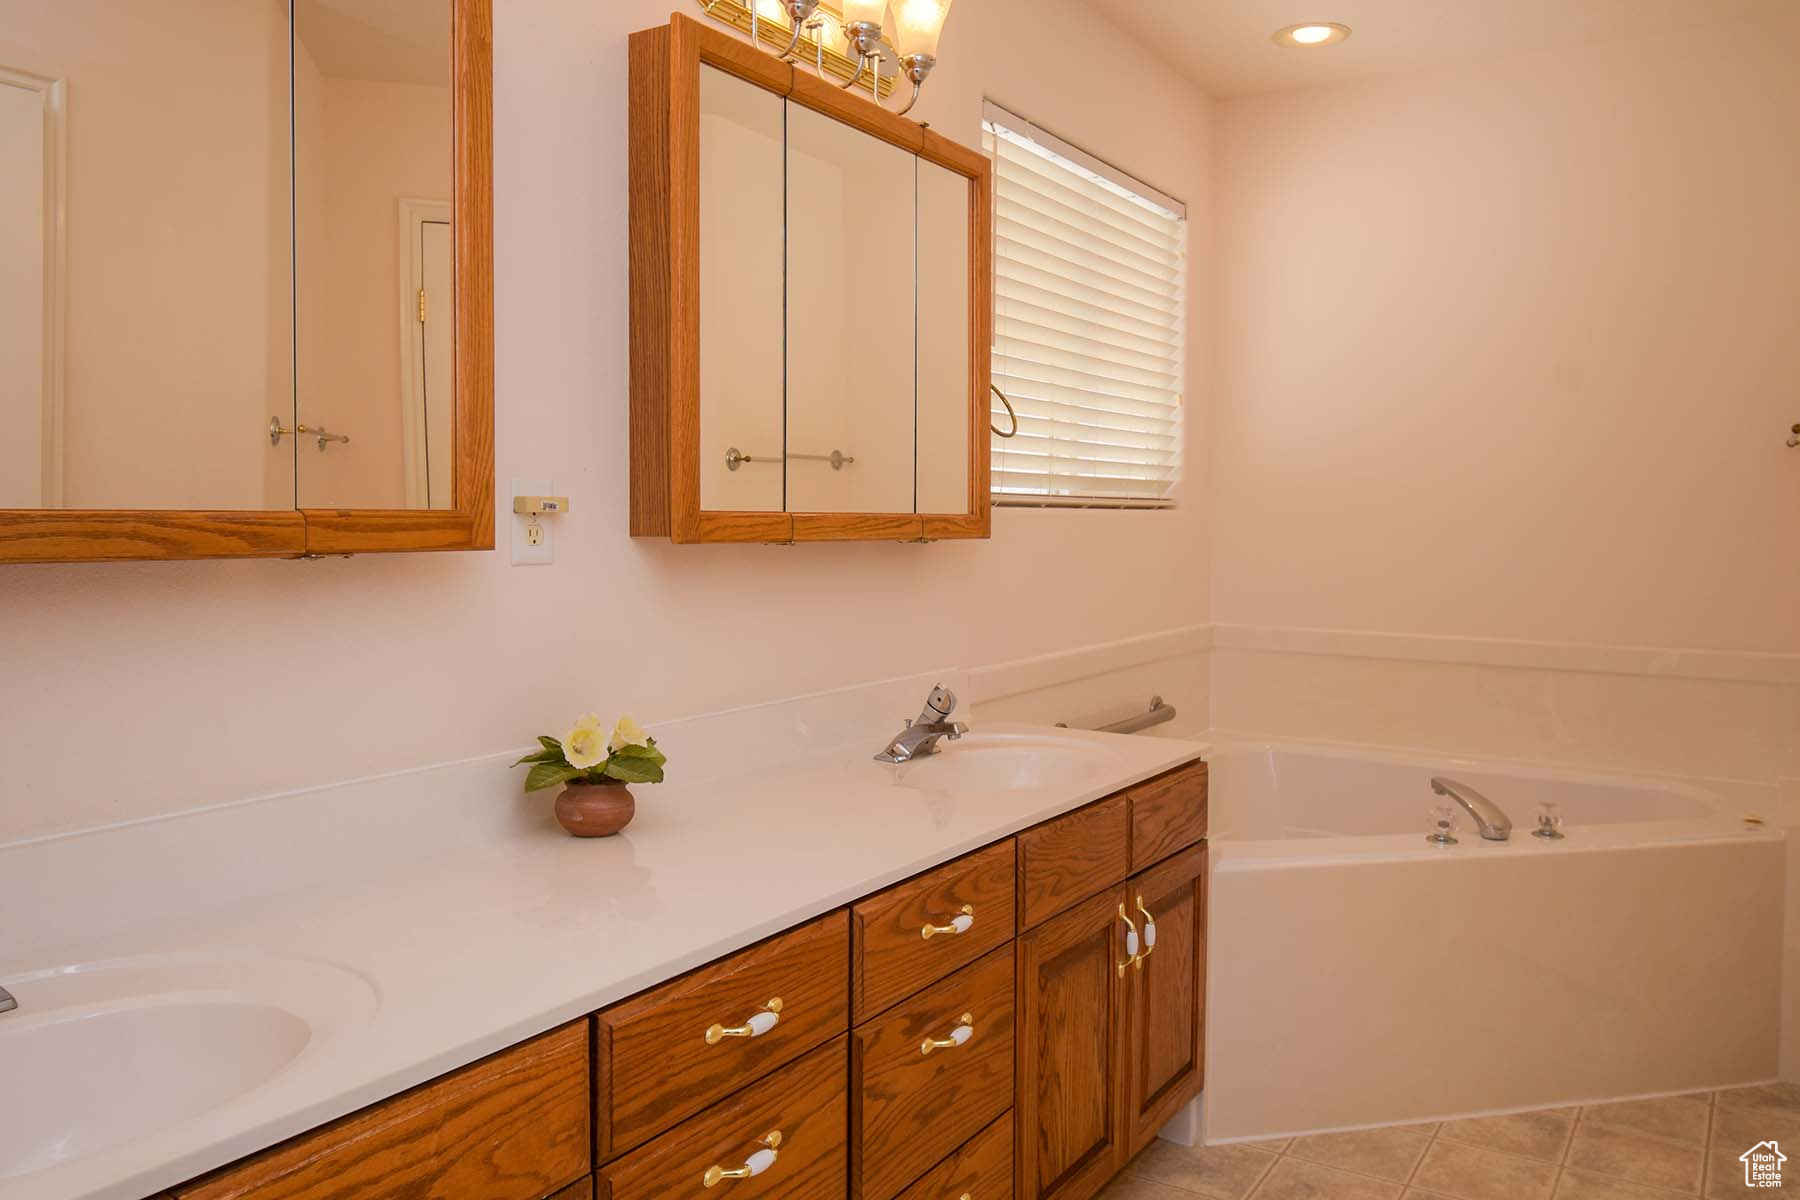 Primary bathroom featuring tile flooring, double sink, vanity with extensive cabinet space, and a bathtub